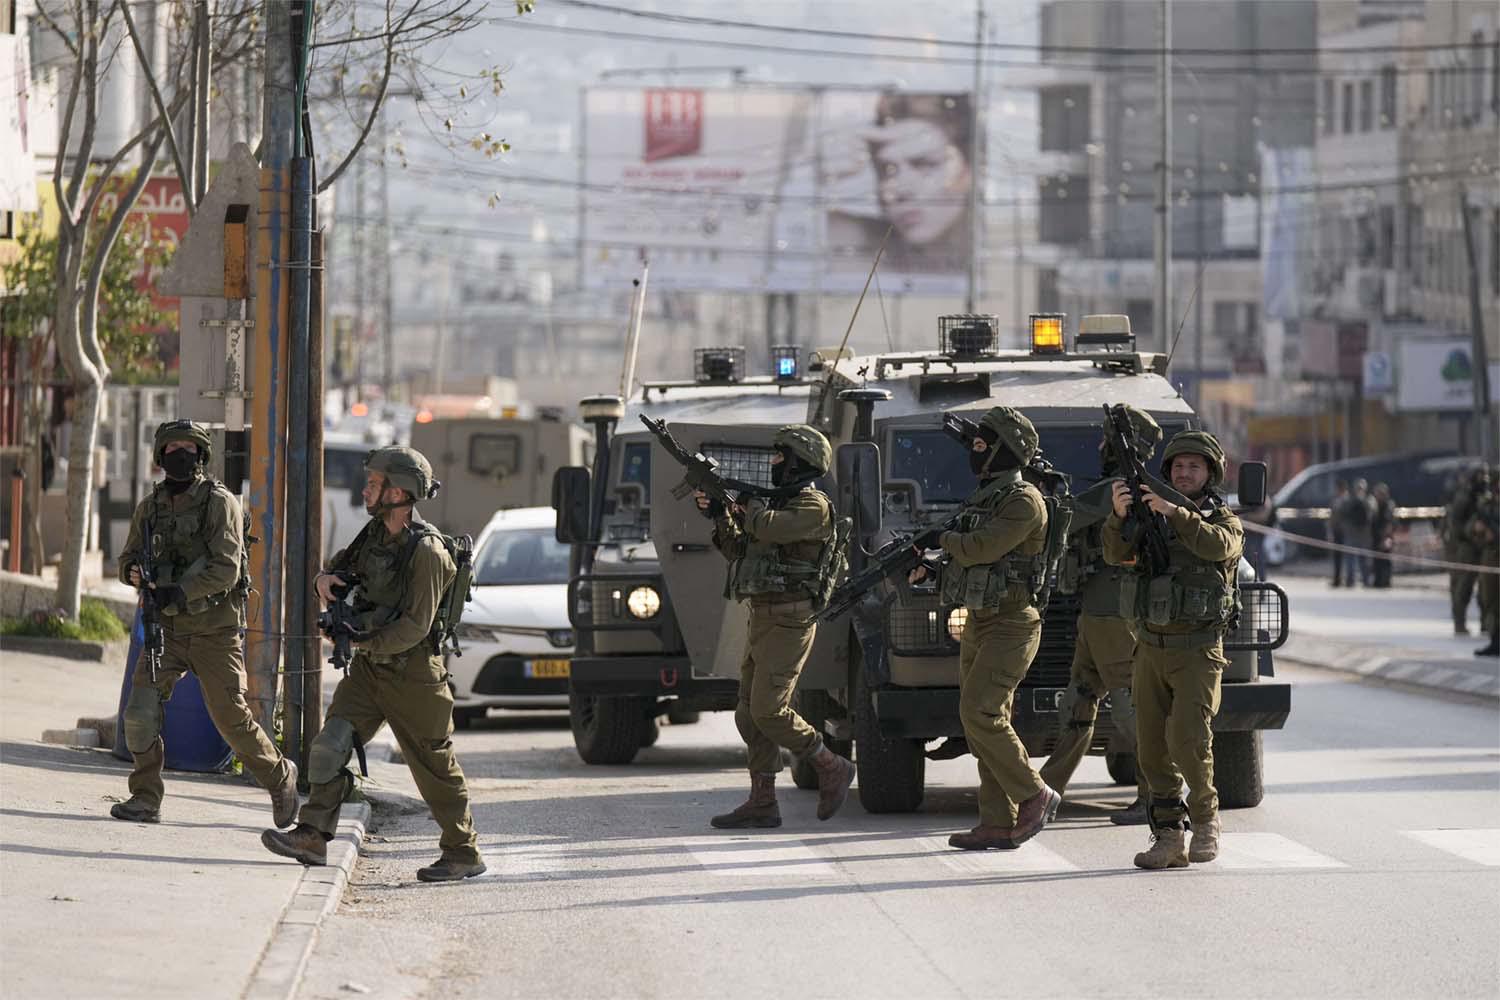 The shooting came days after an Israeli military raid killed 10 Palestinians in Nablus